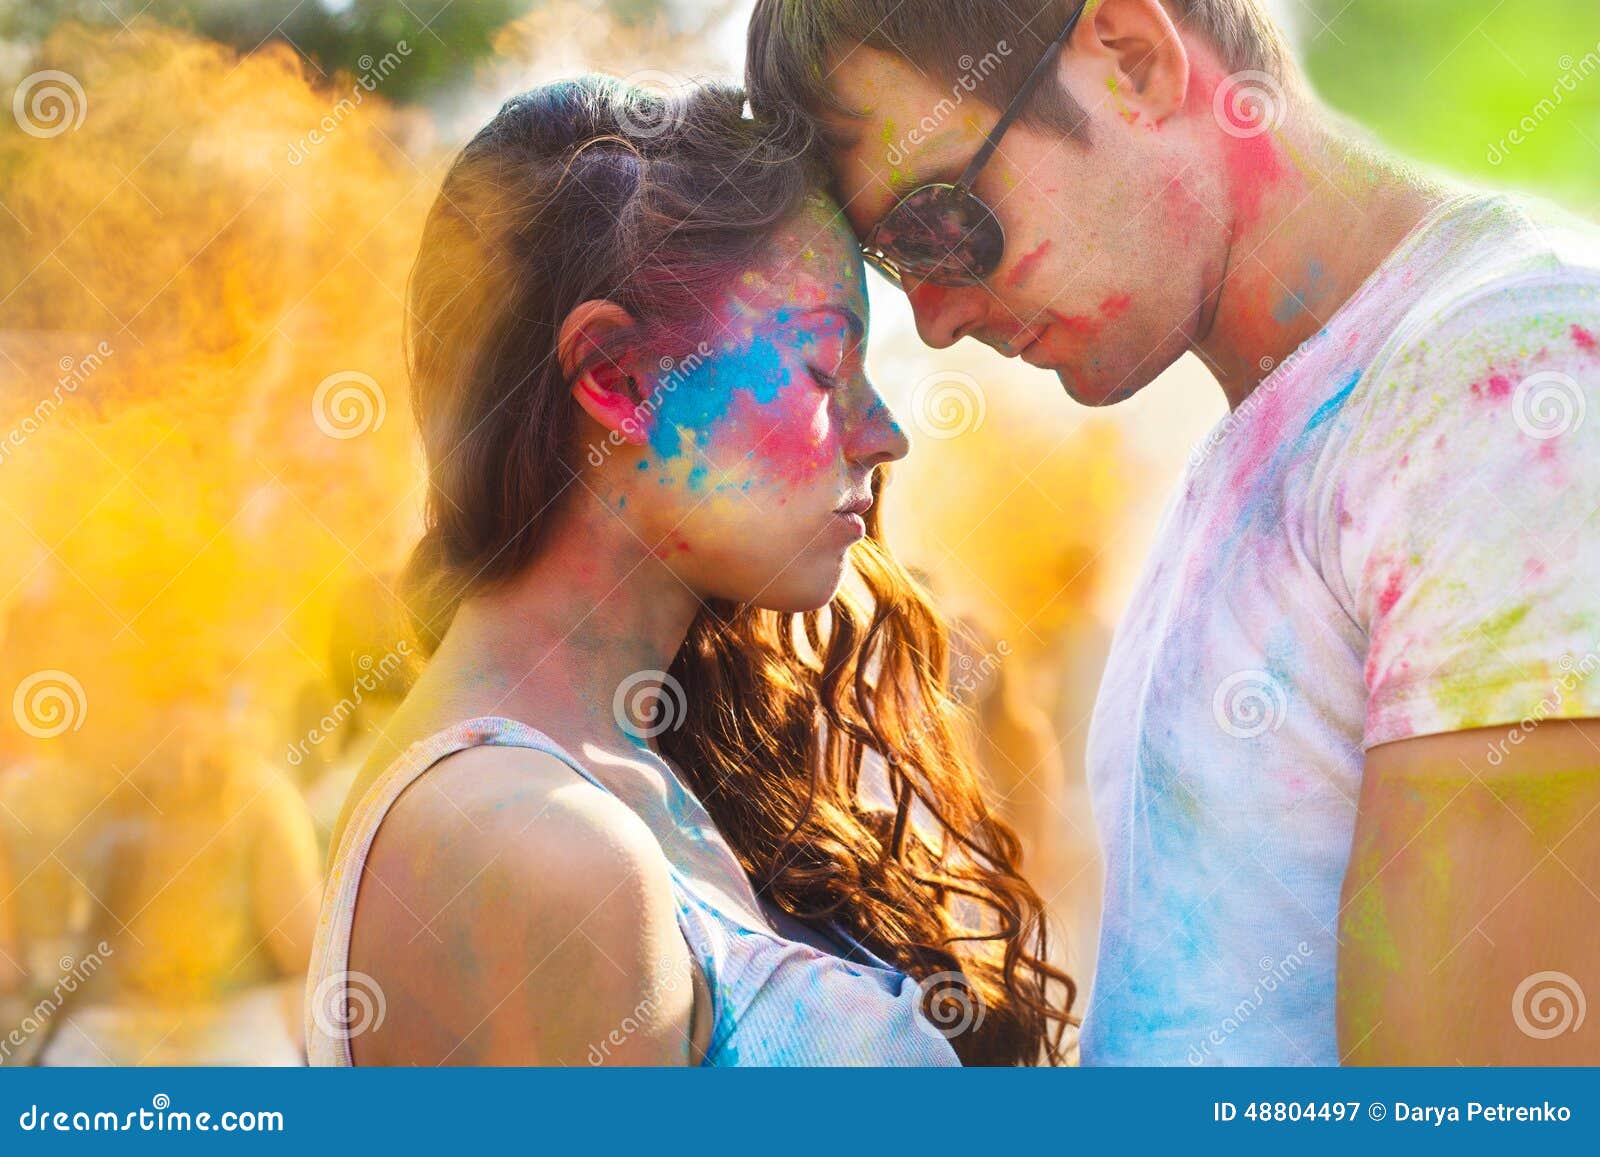 Couple in Love on Holi Color Festival Stock Image - Image of asia ...